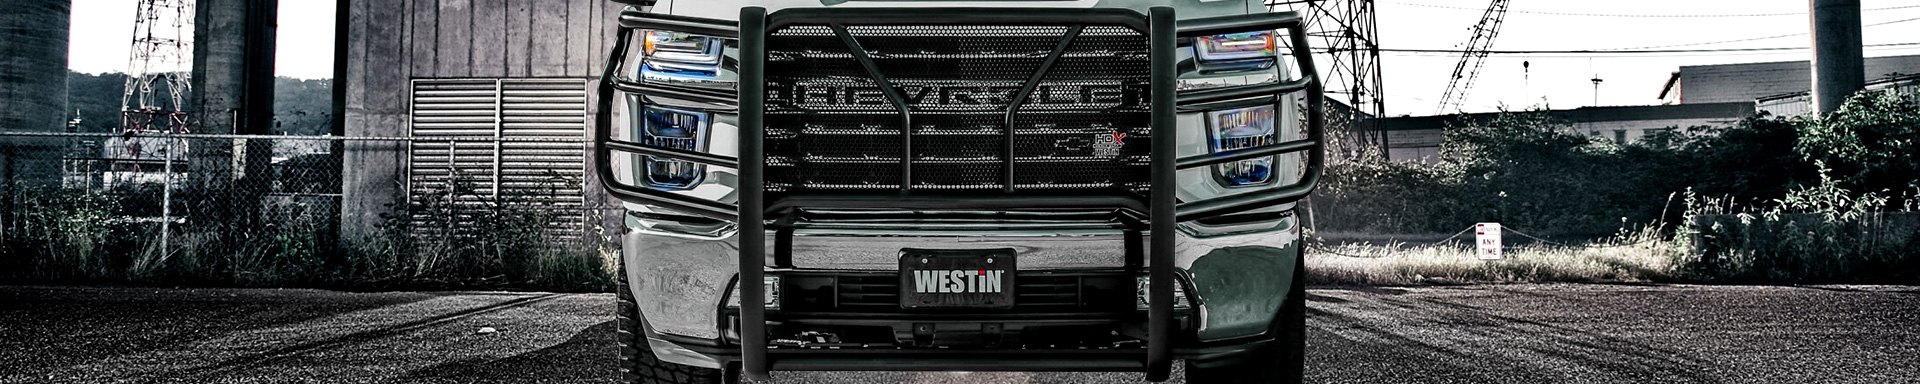 Heavy Duty Protection for Chevy Silverado with Westin HDX Modular Grille Guard